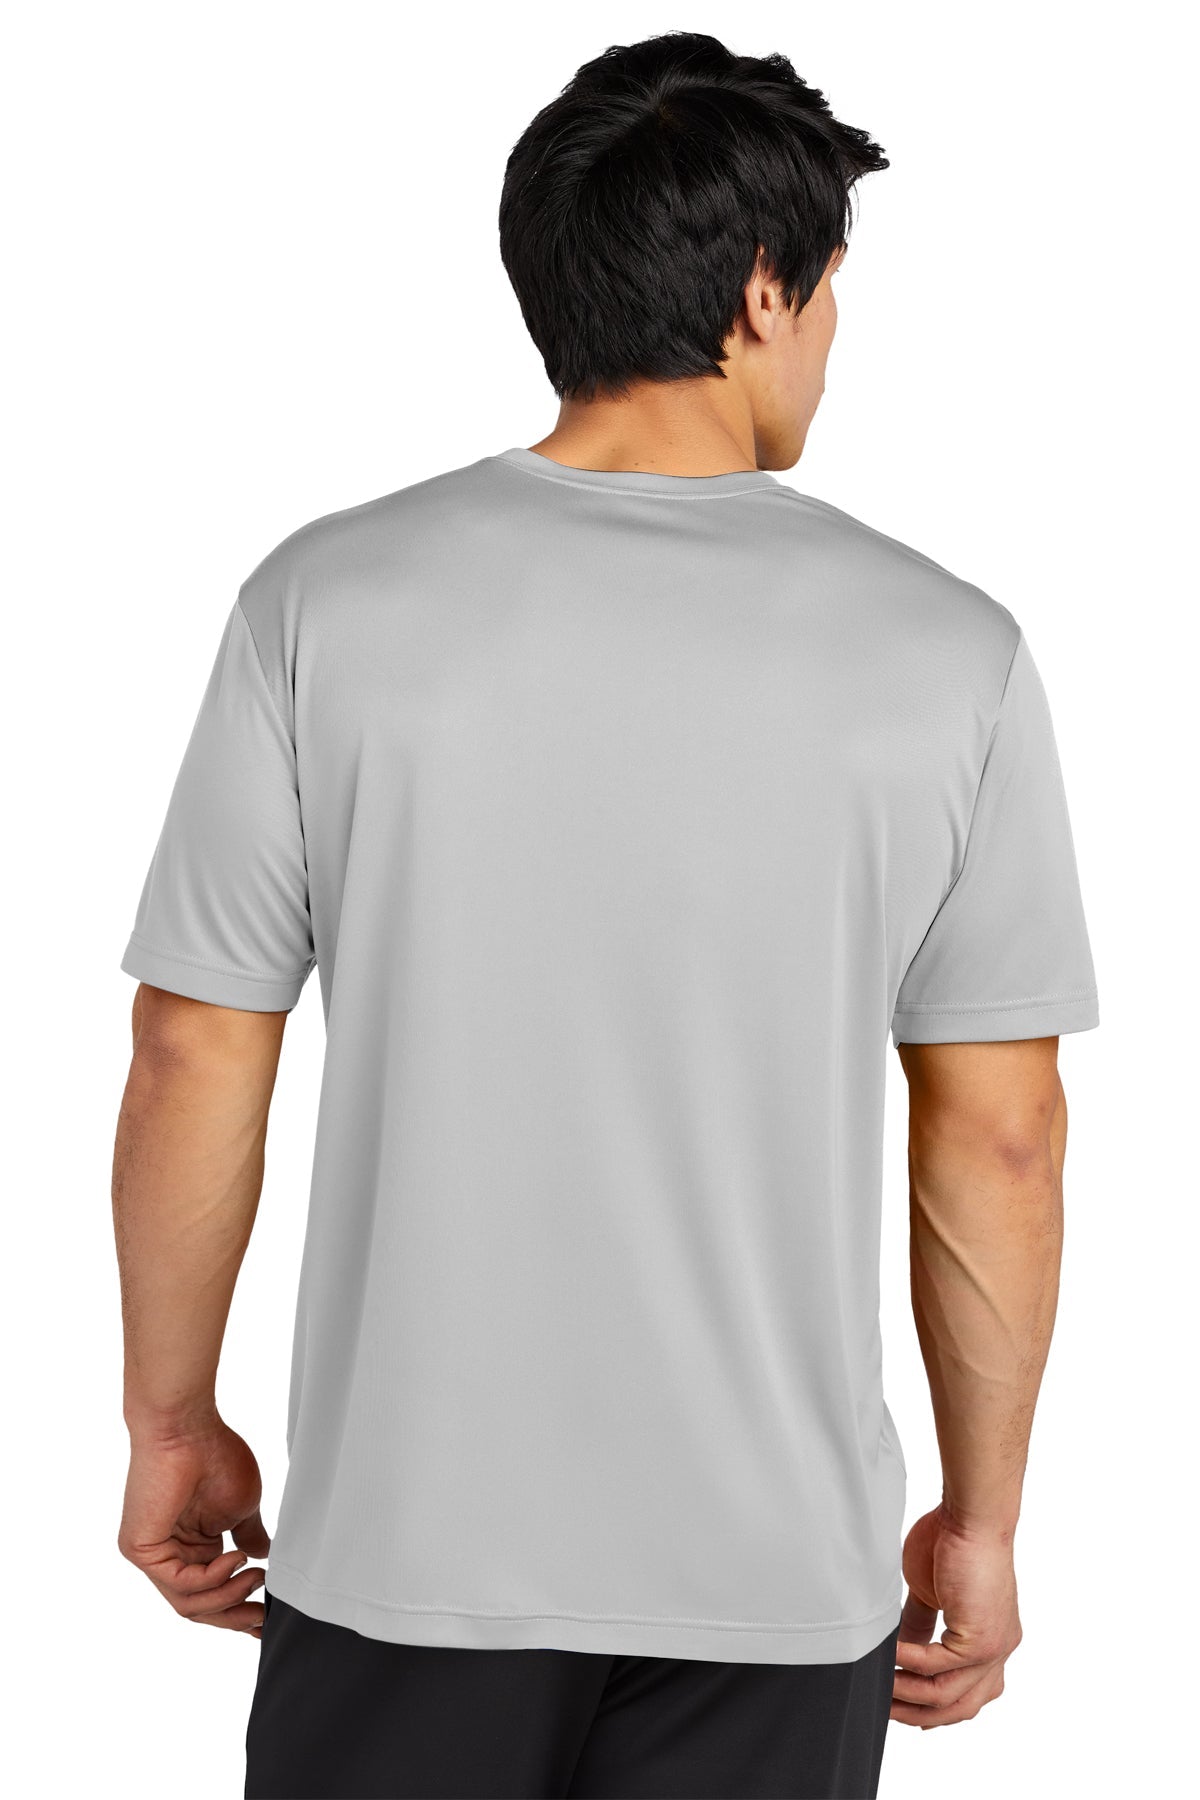 Sport-Tek PosiCharge Customized Re-Compete Tee's, Silver